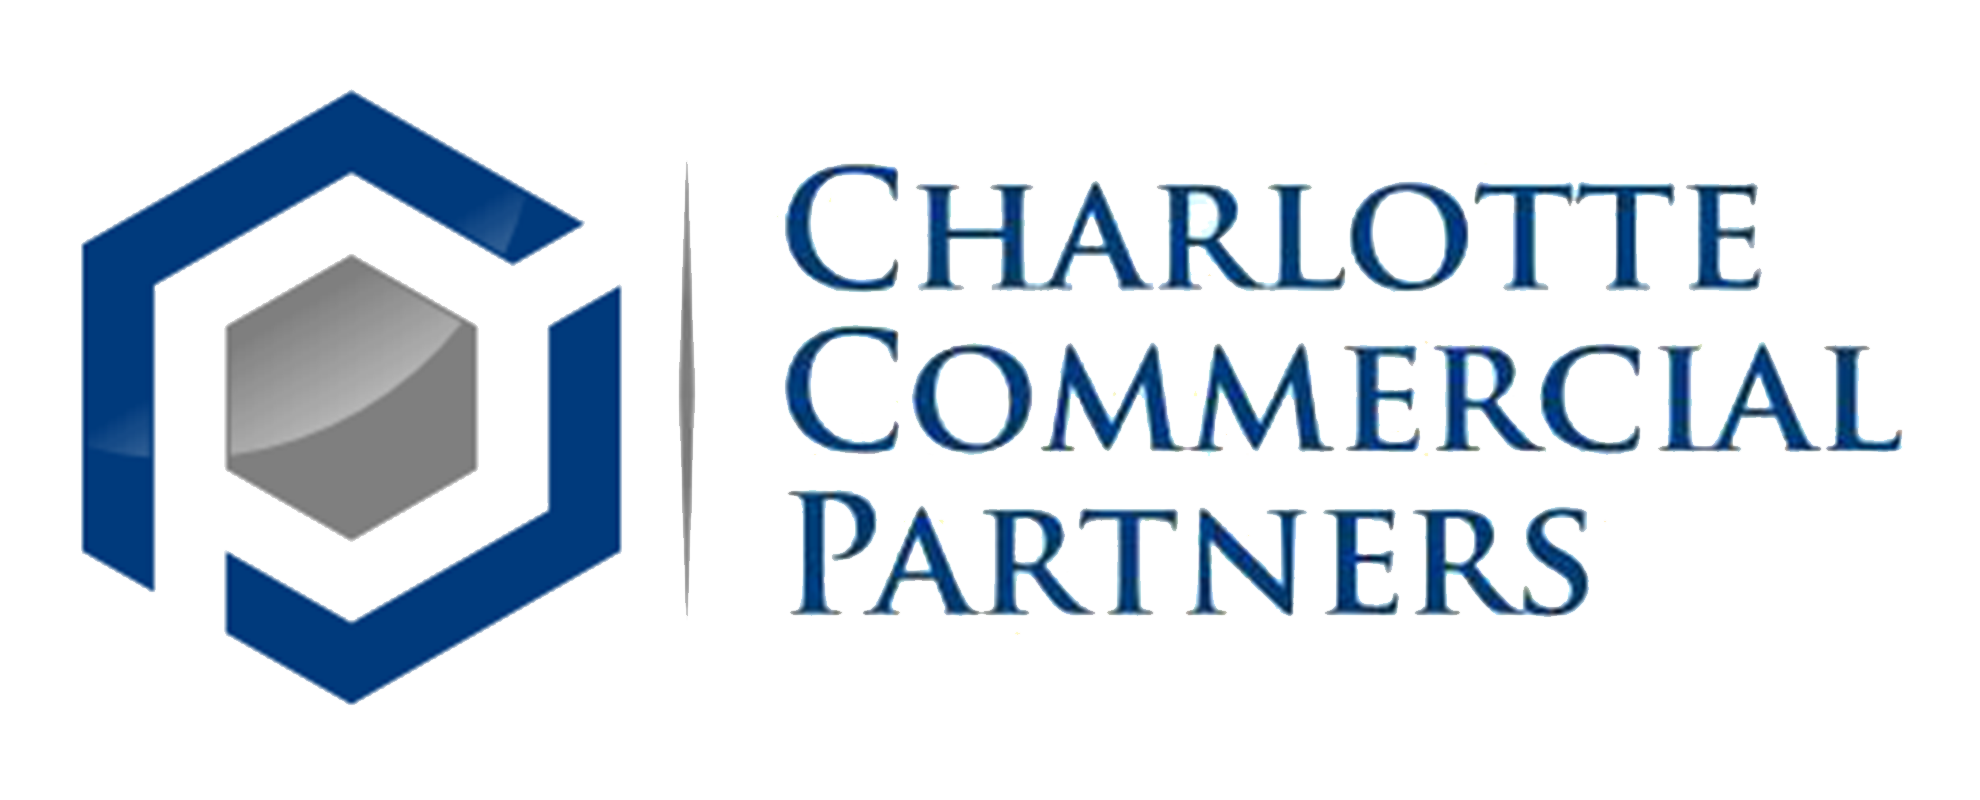 Charlotte Commercial Partners